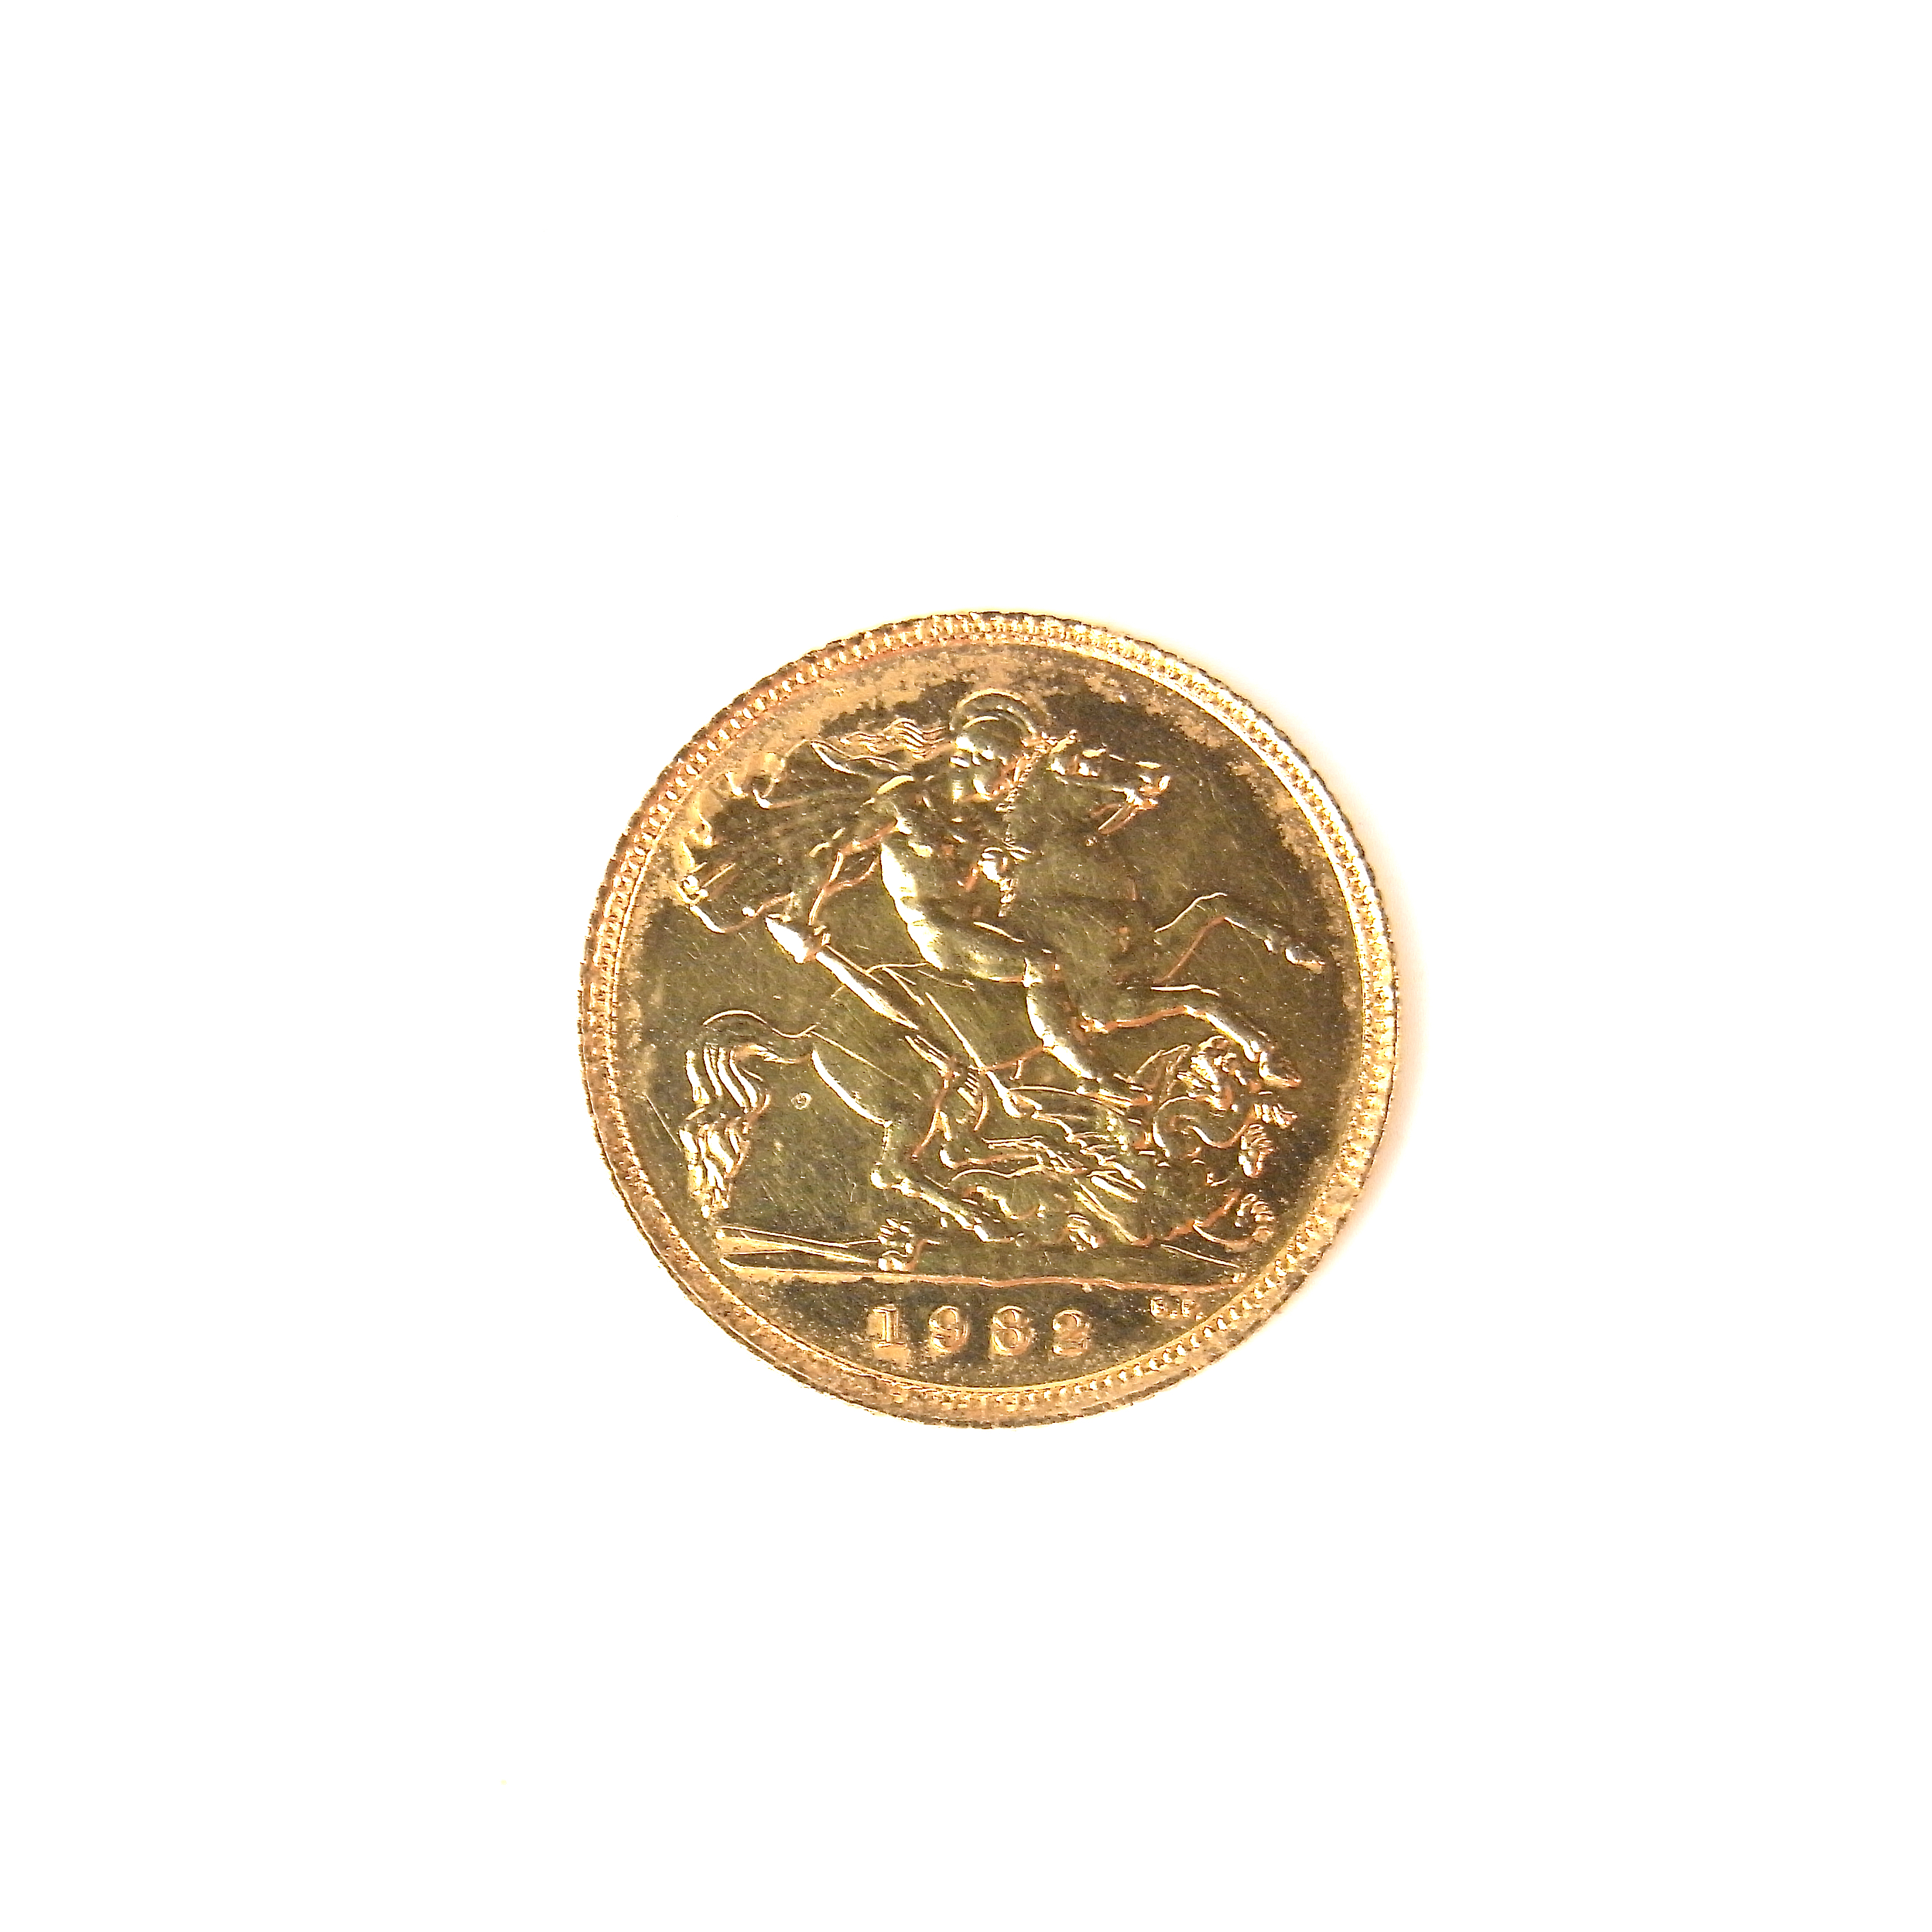 Gold sovereign. - Image 2 of 2